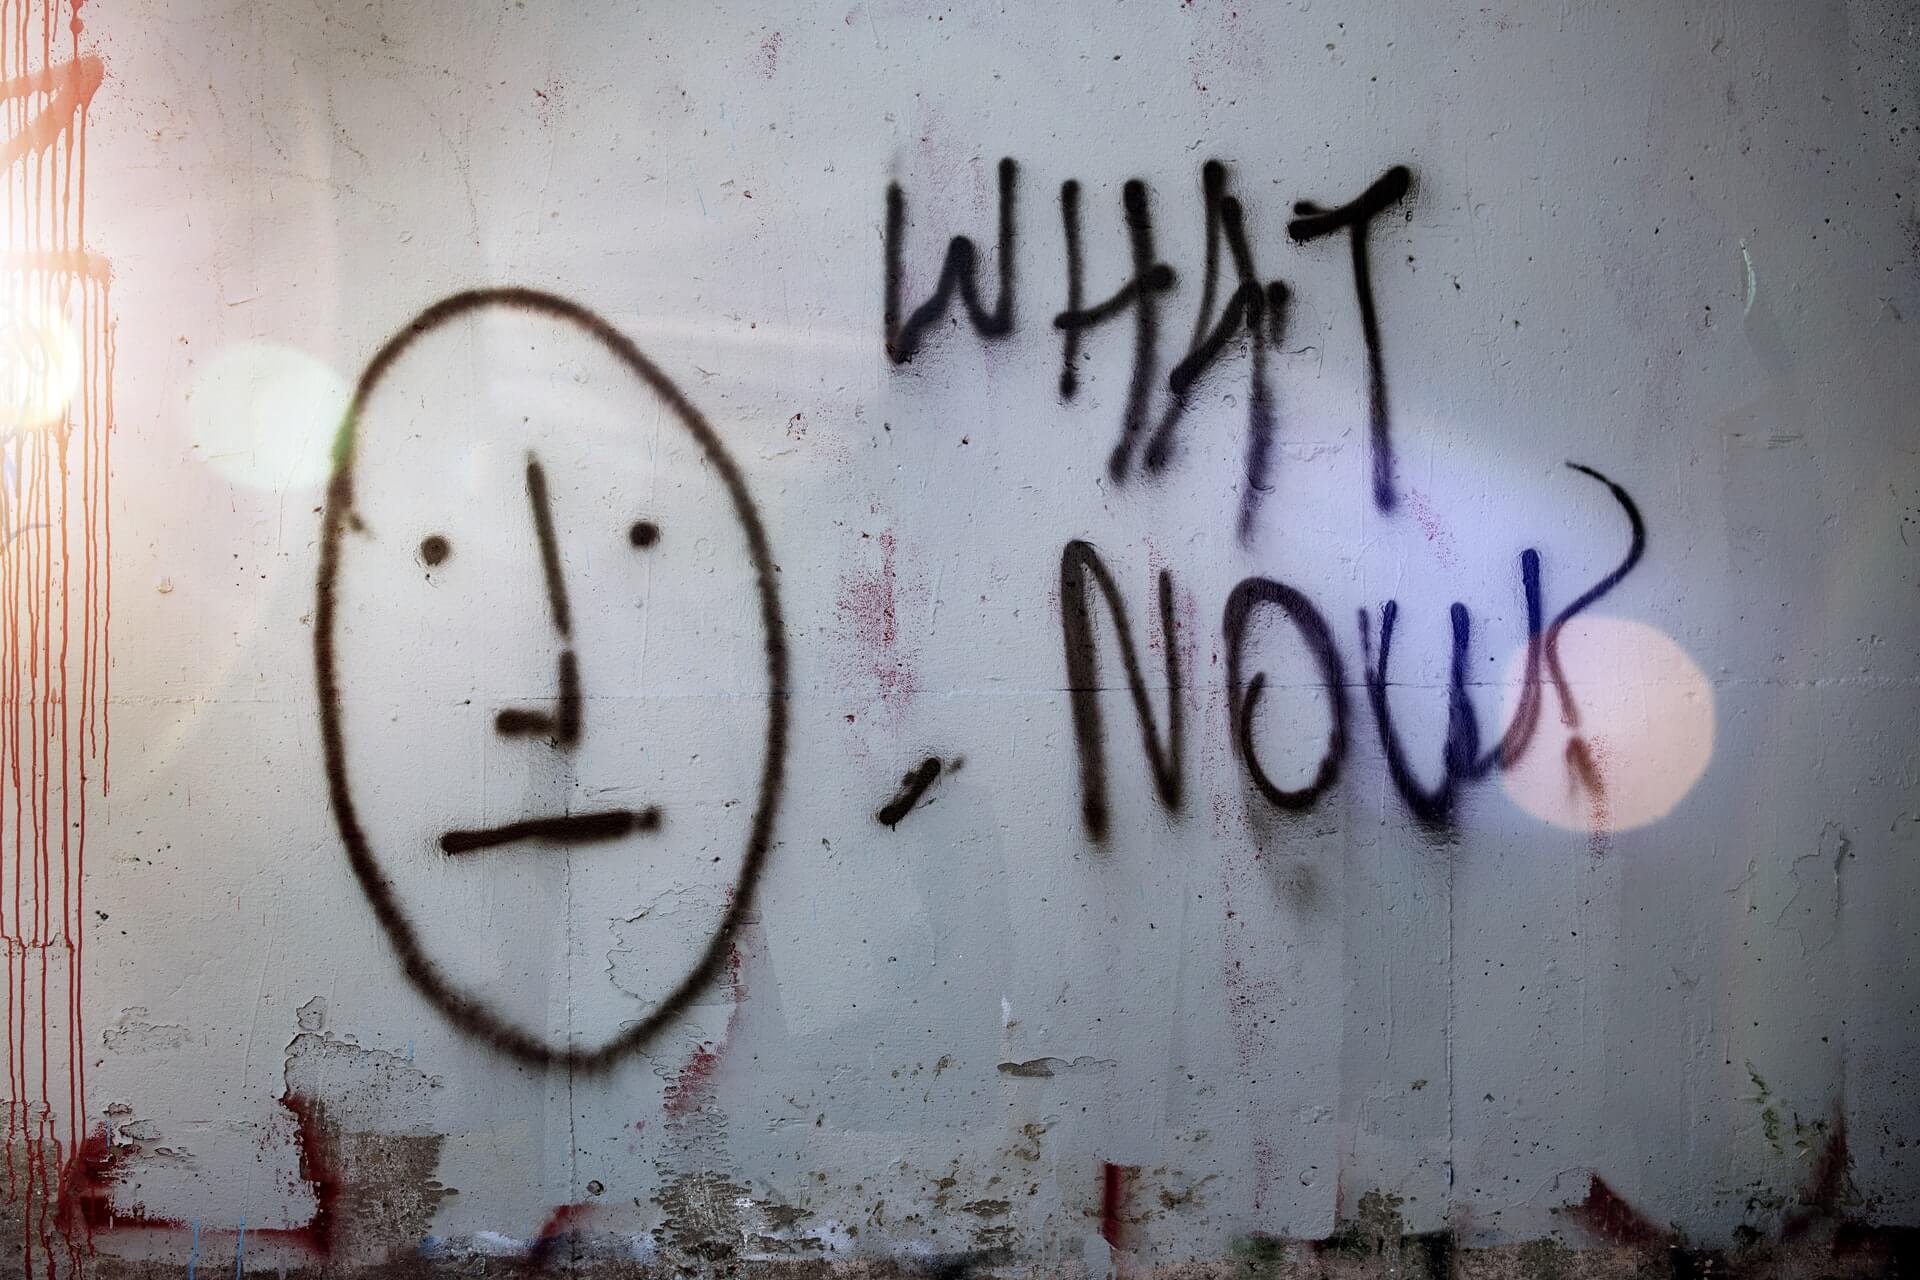 "What Now?" graffiti in black spray paint on wall